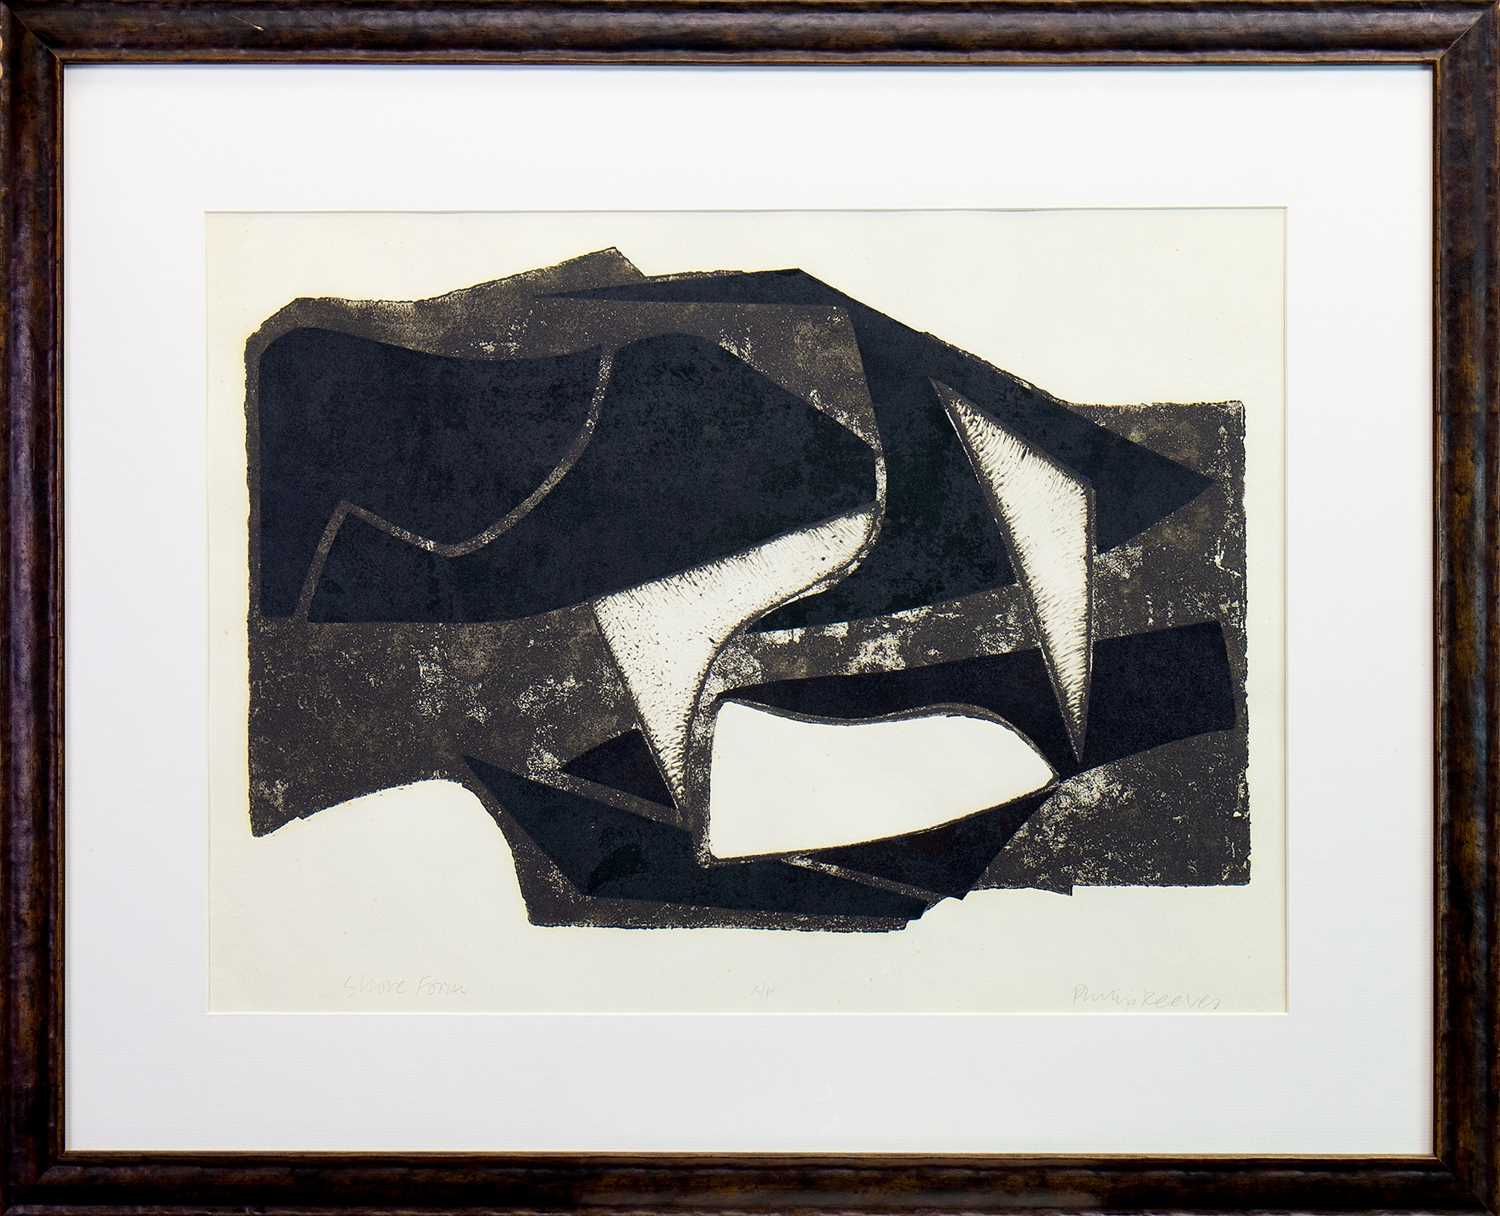 Lot 538 - SHORE FORM, A SCREENPRINT BY PHILIP REEVES